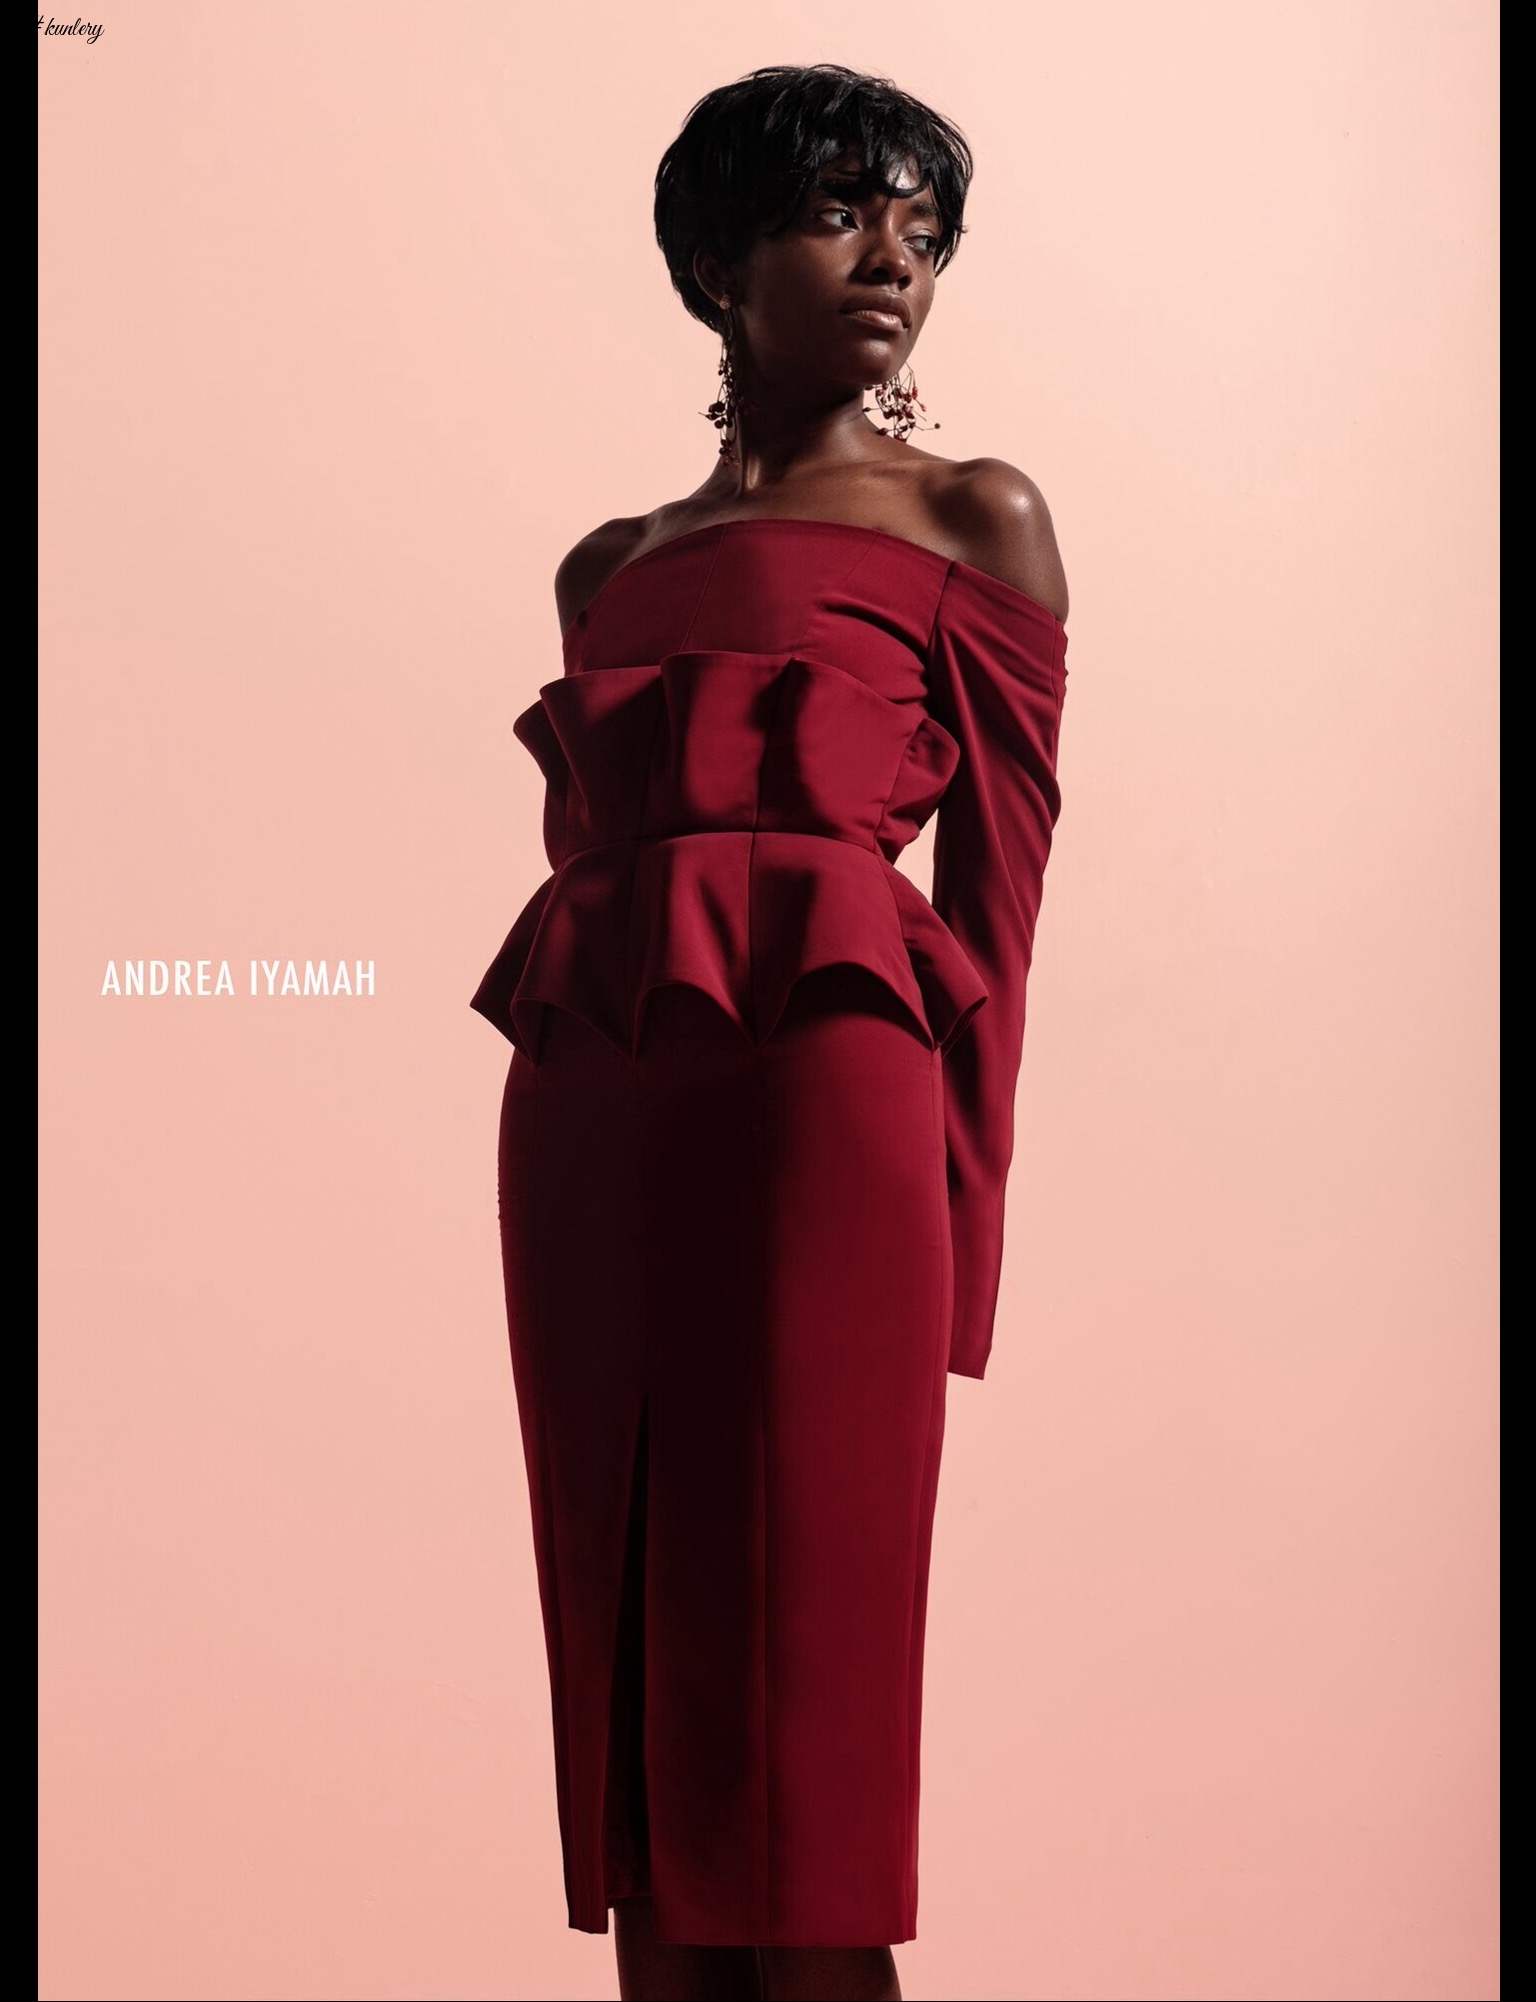 Andrea Iyamah Presents The Look Book For Her Spring/Summer 2017 Collection